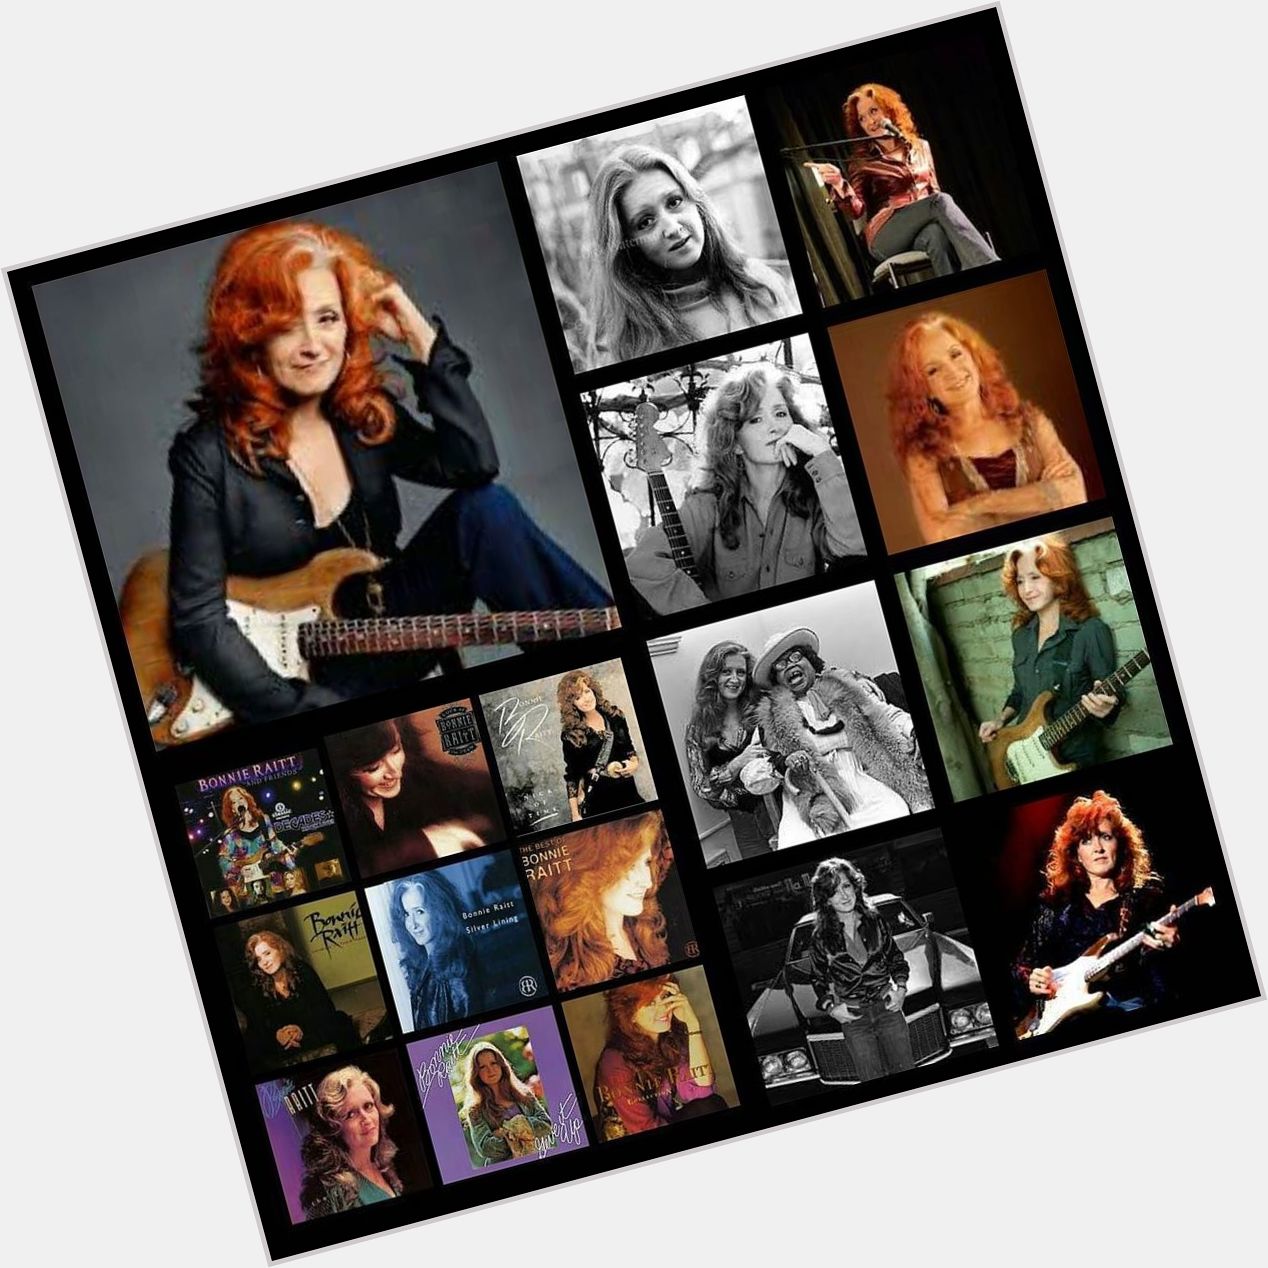  :  | Happy Birthday Wishes Today To Bonnie Raitt who was Born on this day in 194 